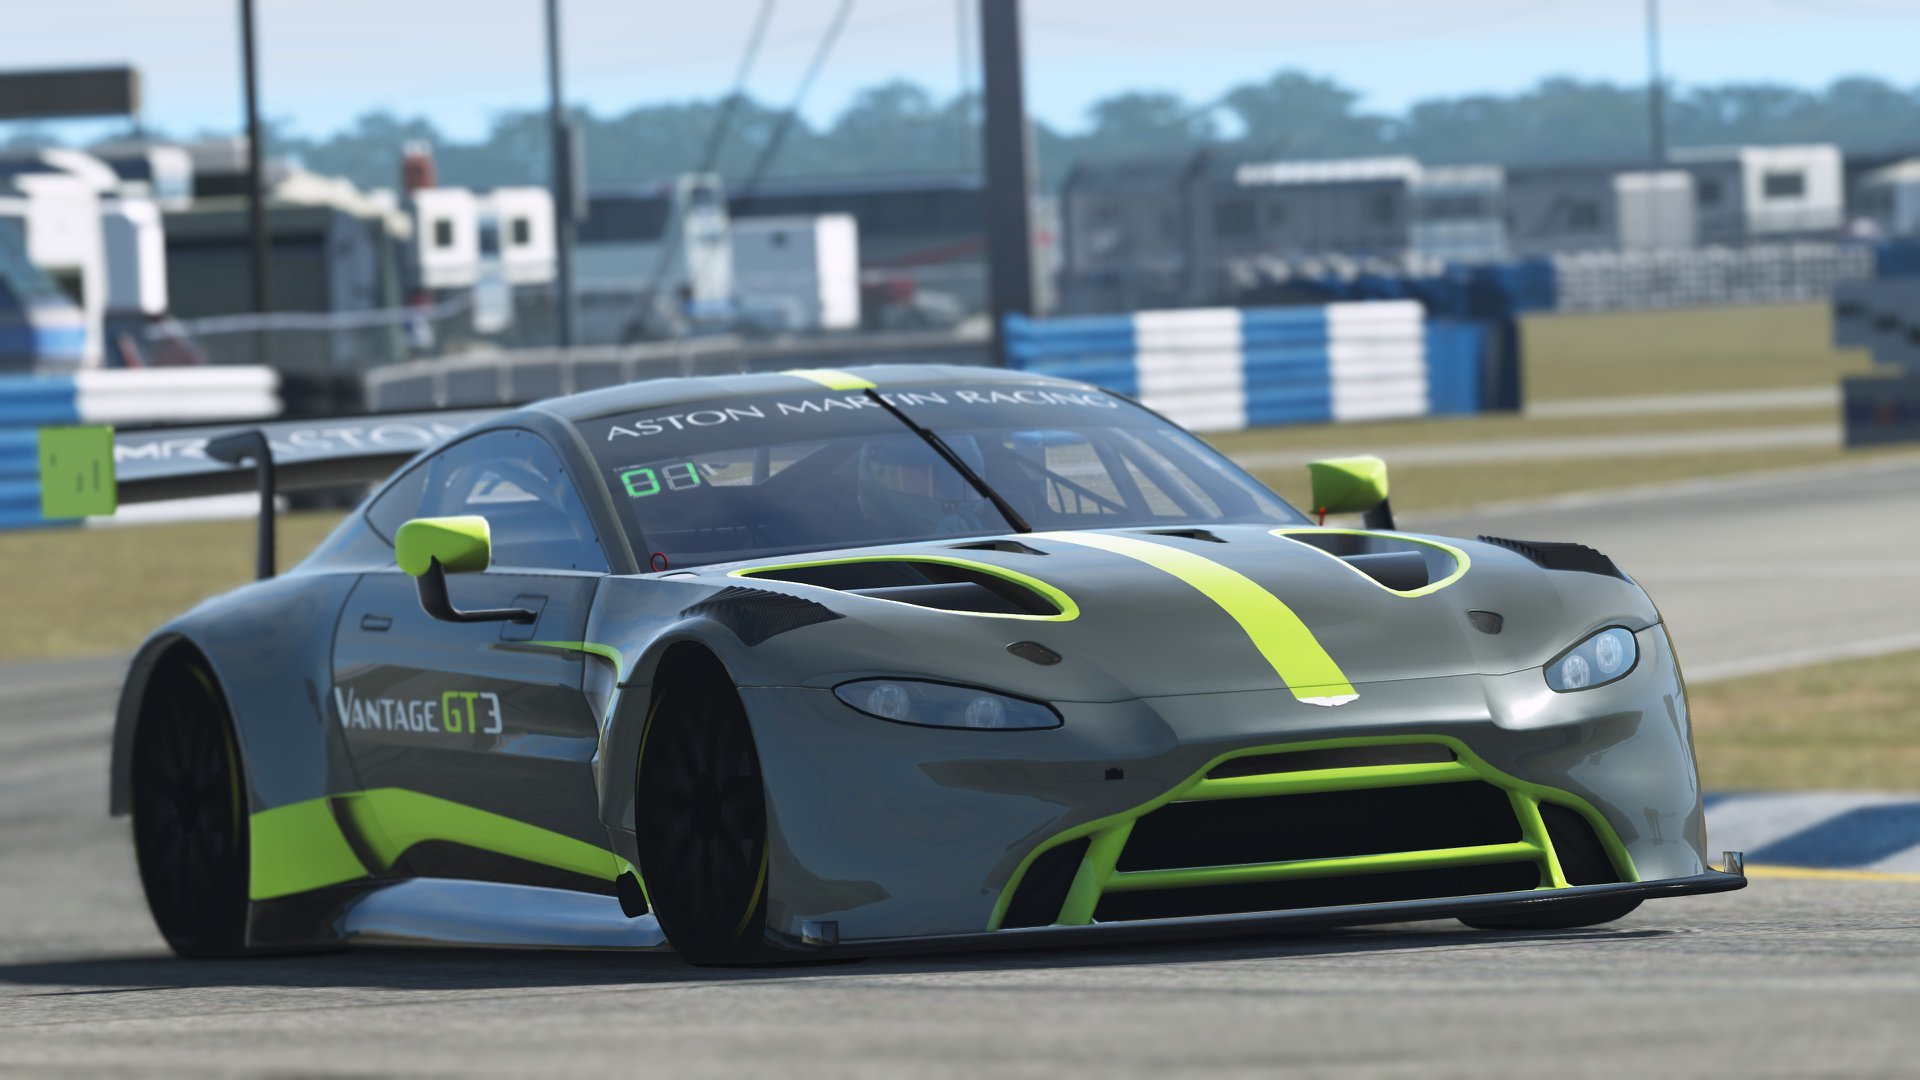 More information about "rFactor 2: Aston Martin GT3 disponibile, confronto fra Audi e BMW"